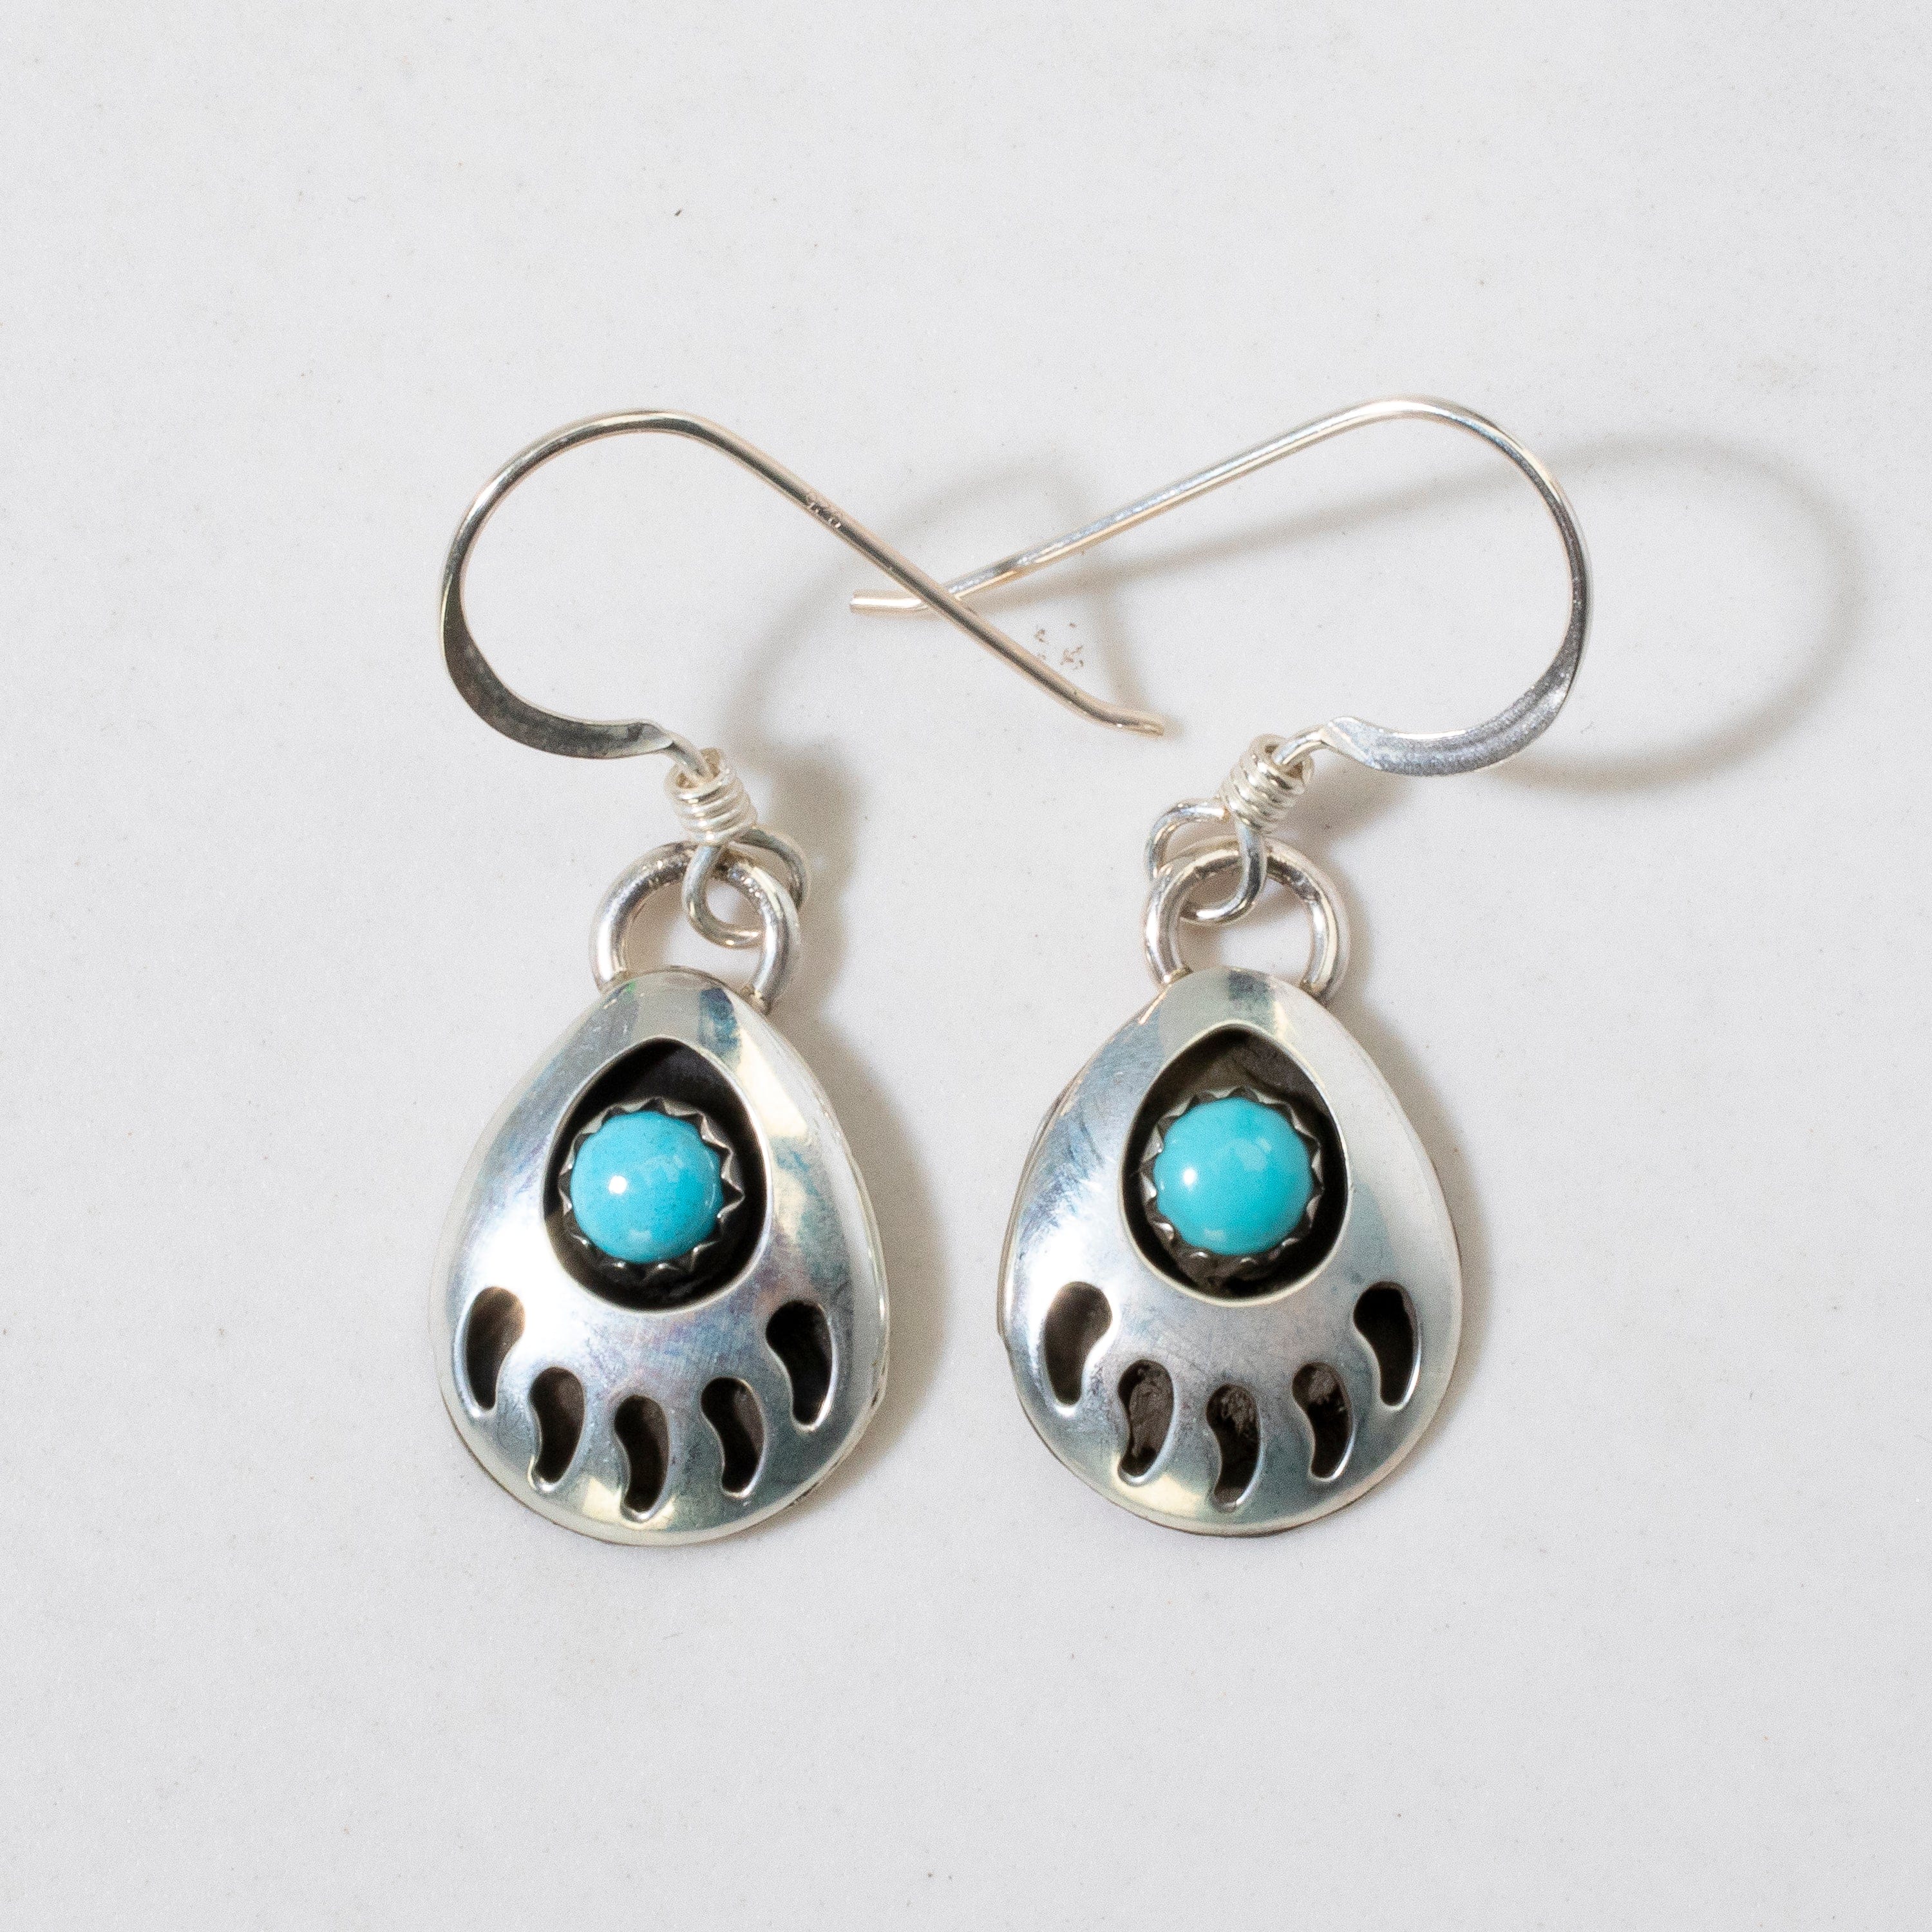 Kalifano Native American Jewelry Esther White Navajo Bear Claw with Turquoise USA Native American Made 925 Sterling Silver Earrings with French Hook NAE100.007